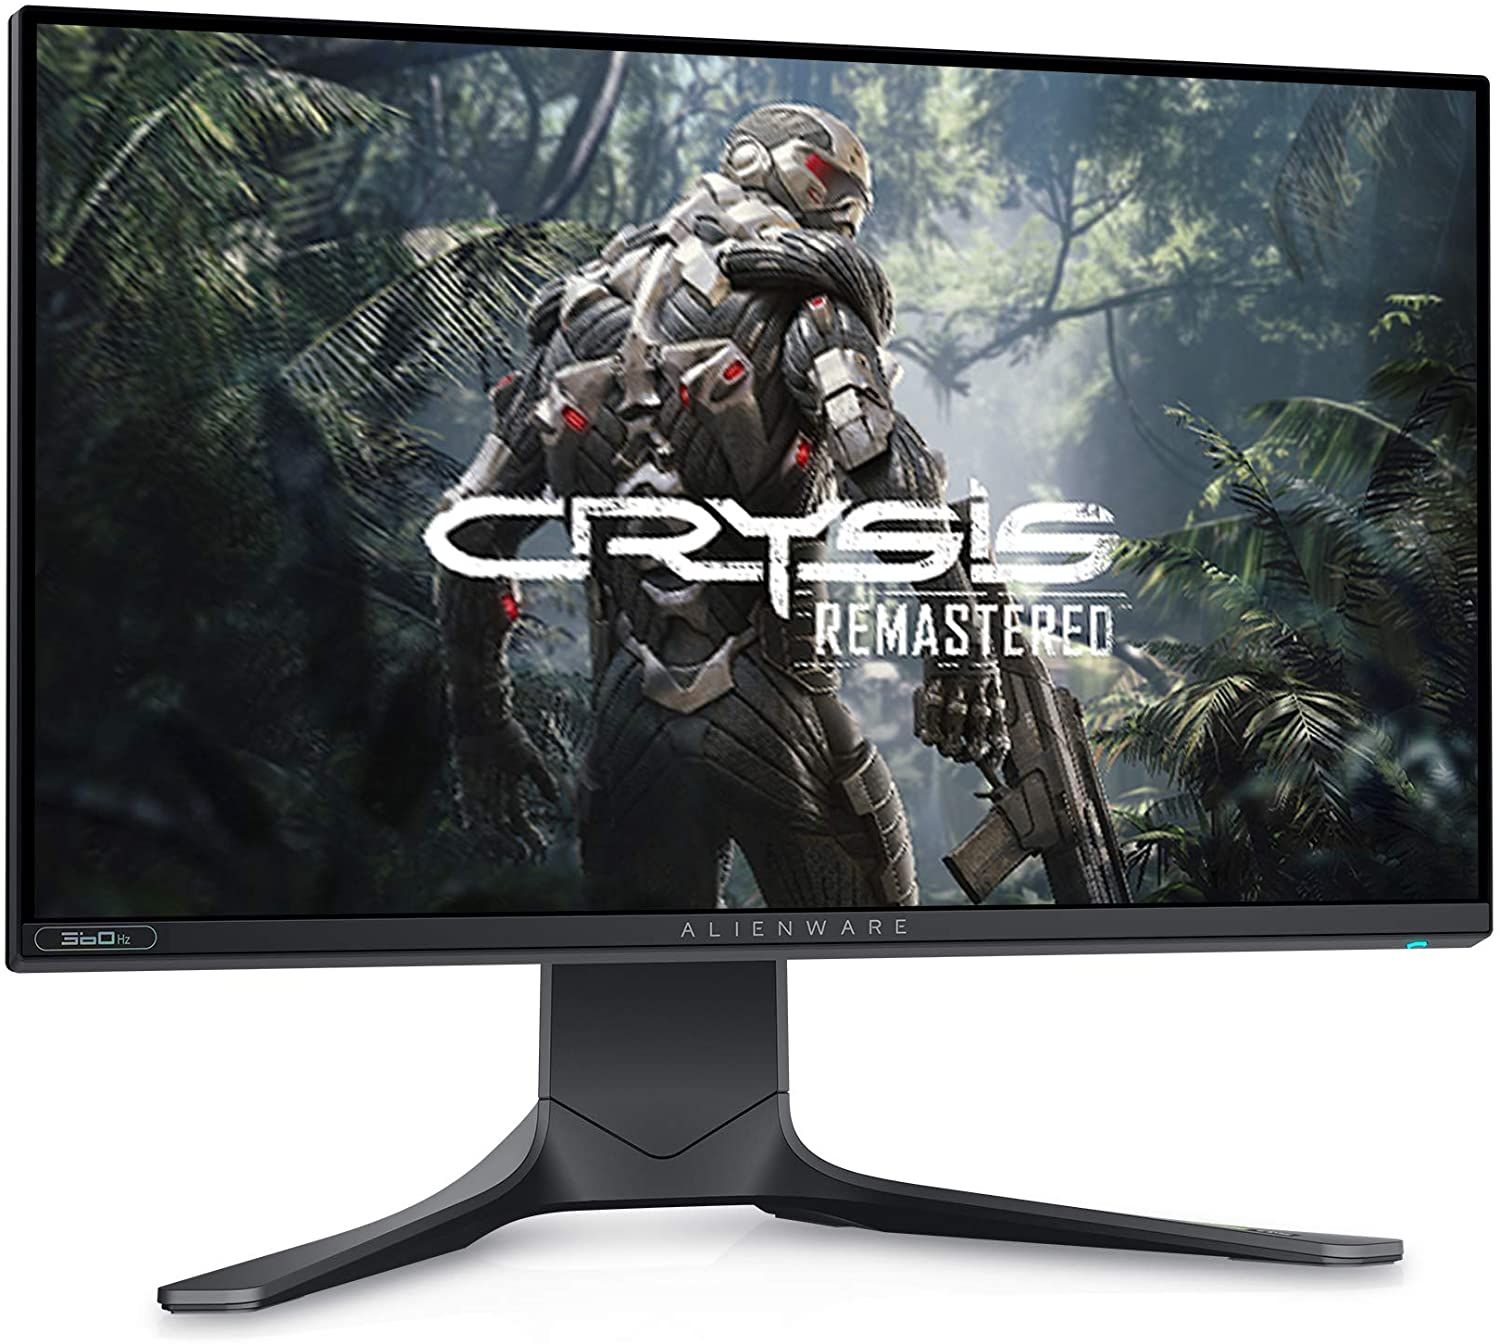 Alienware AW2521H product image of a black monitor with a character from Crysis on the display.